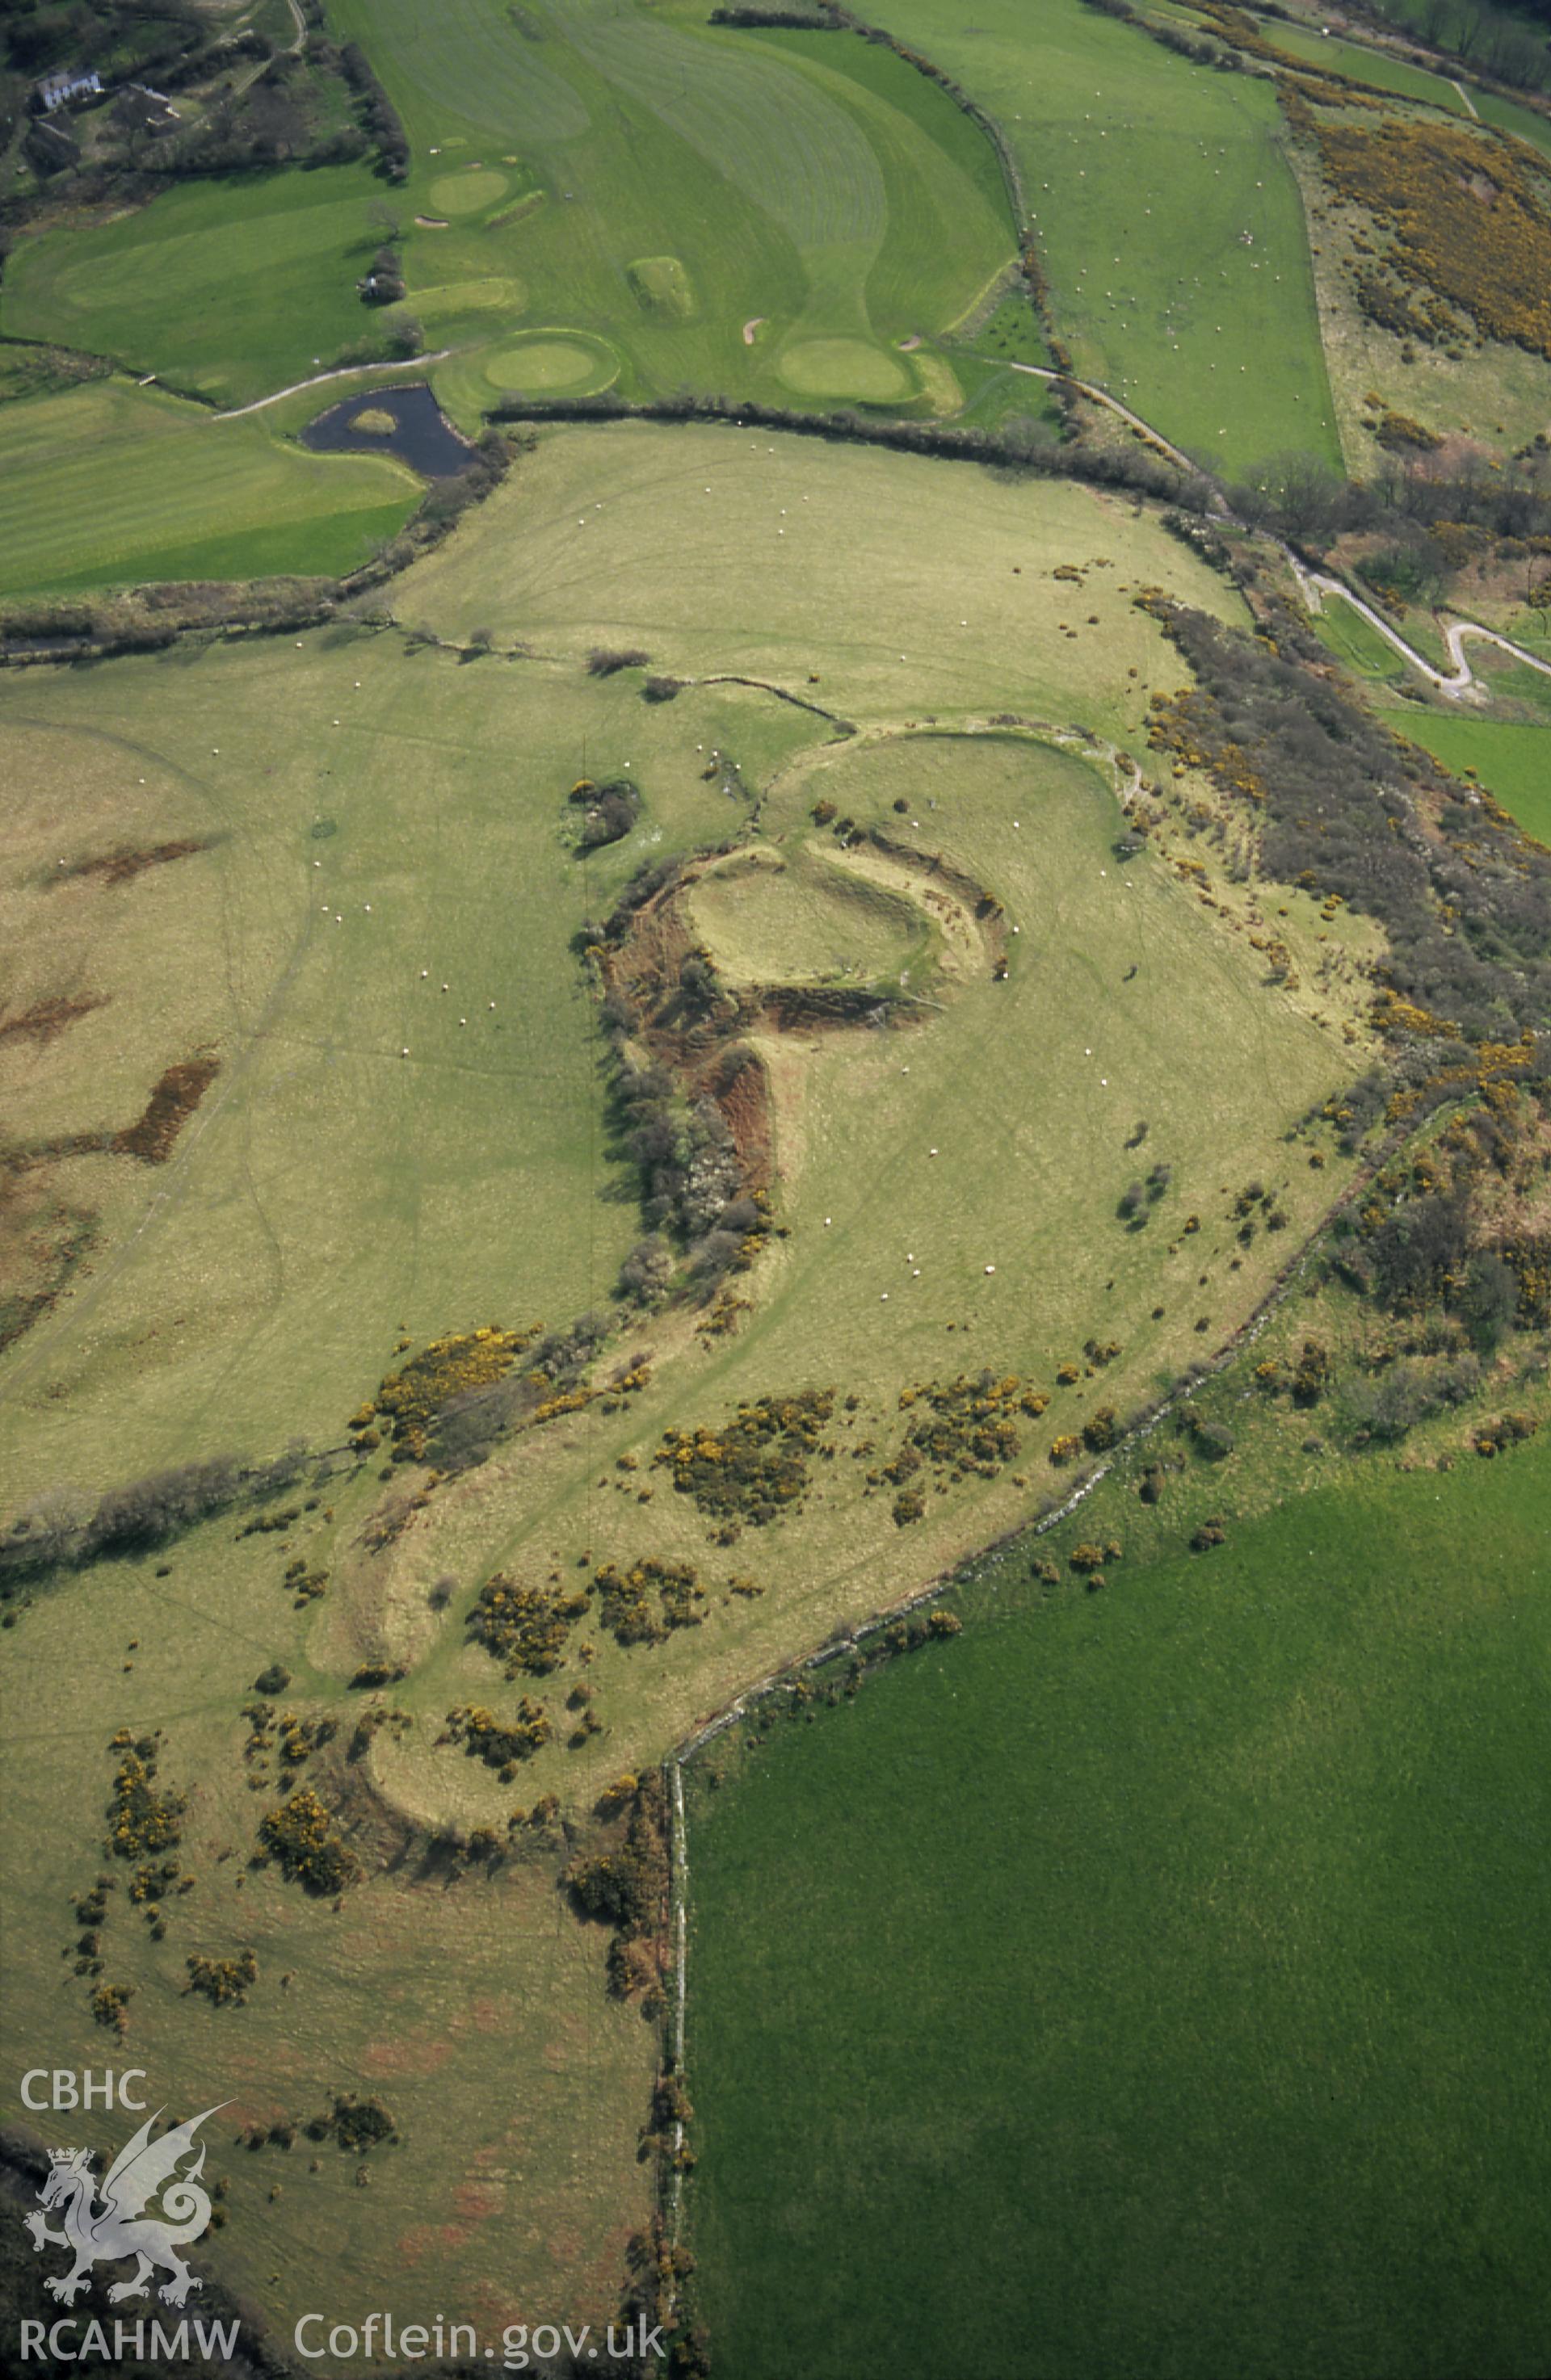 RCAHMW colour slide oblique aerial photograph of Caer Penrhos, Llanrhystyd, taken on 31/03/1998 by Toby Driver